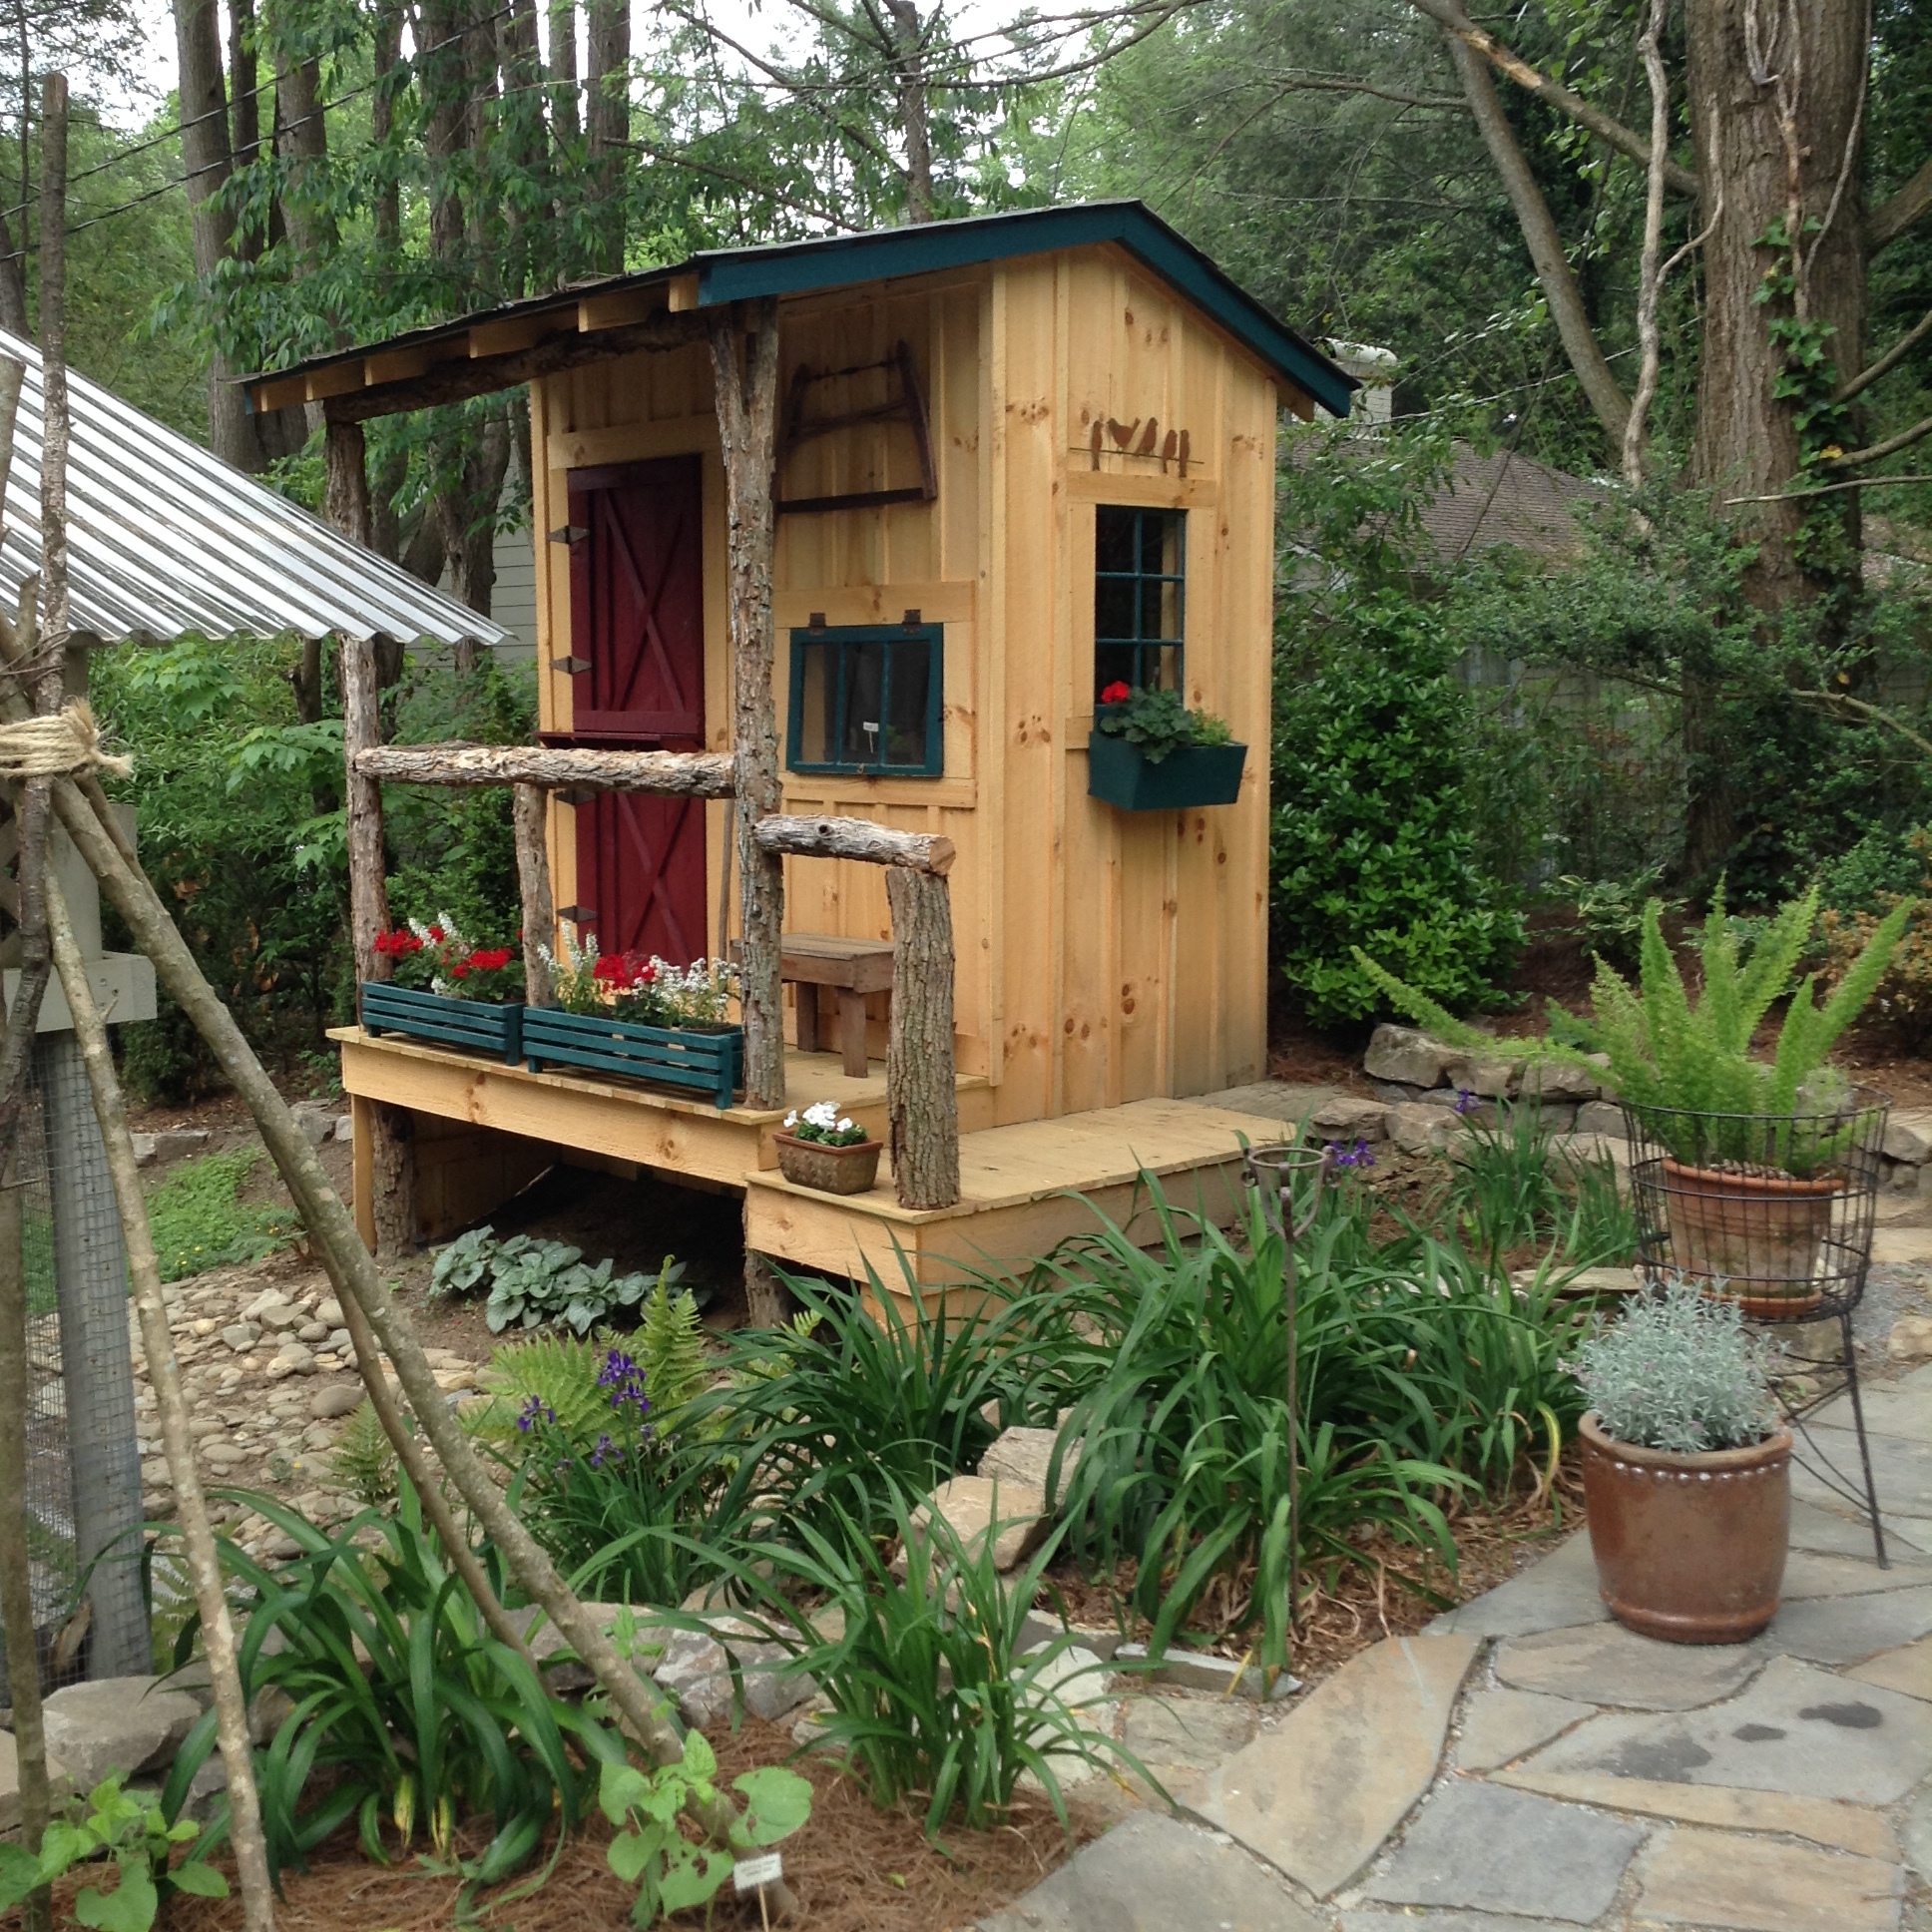 A garden shed with style can be incorporated into the garden, not hidden away behind the garage.